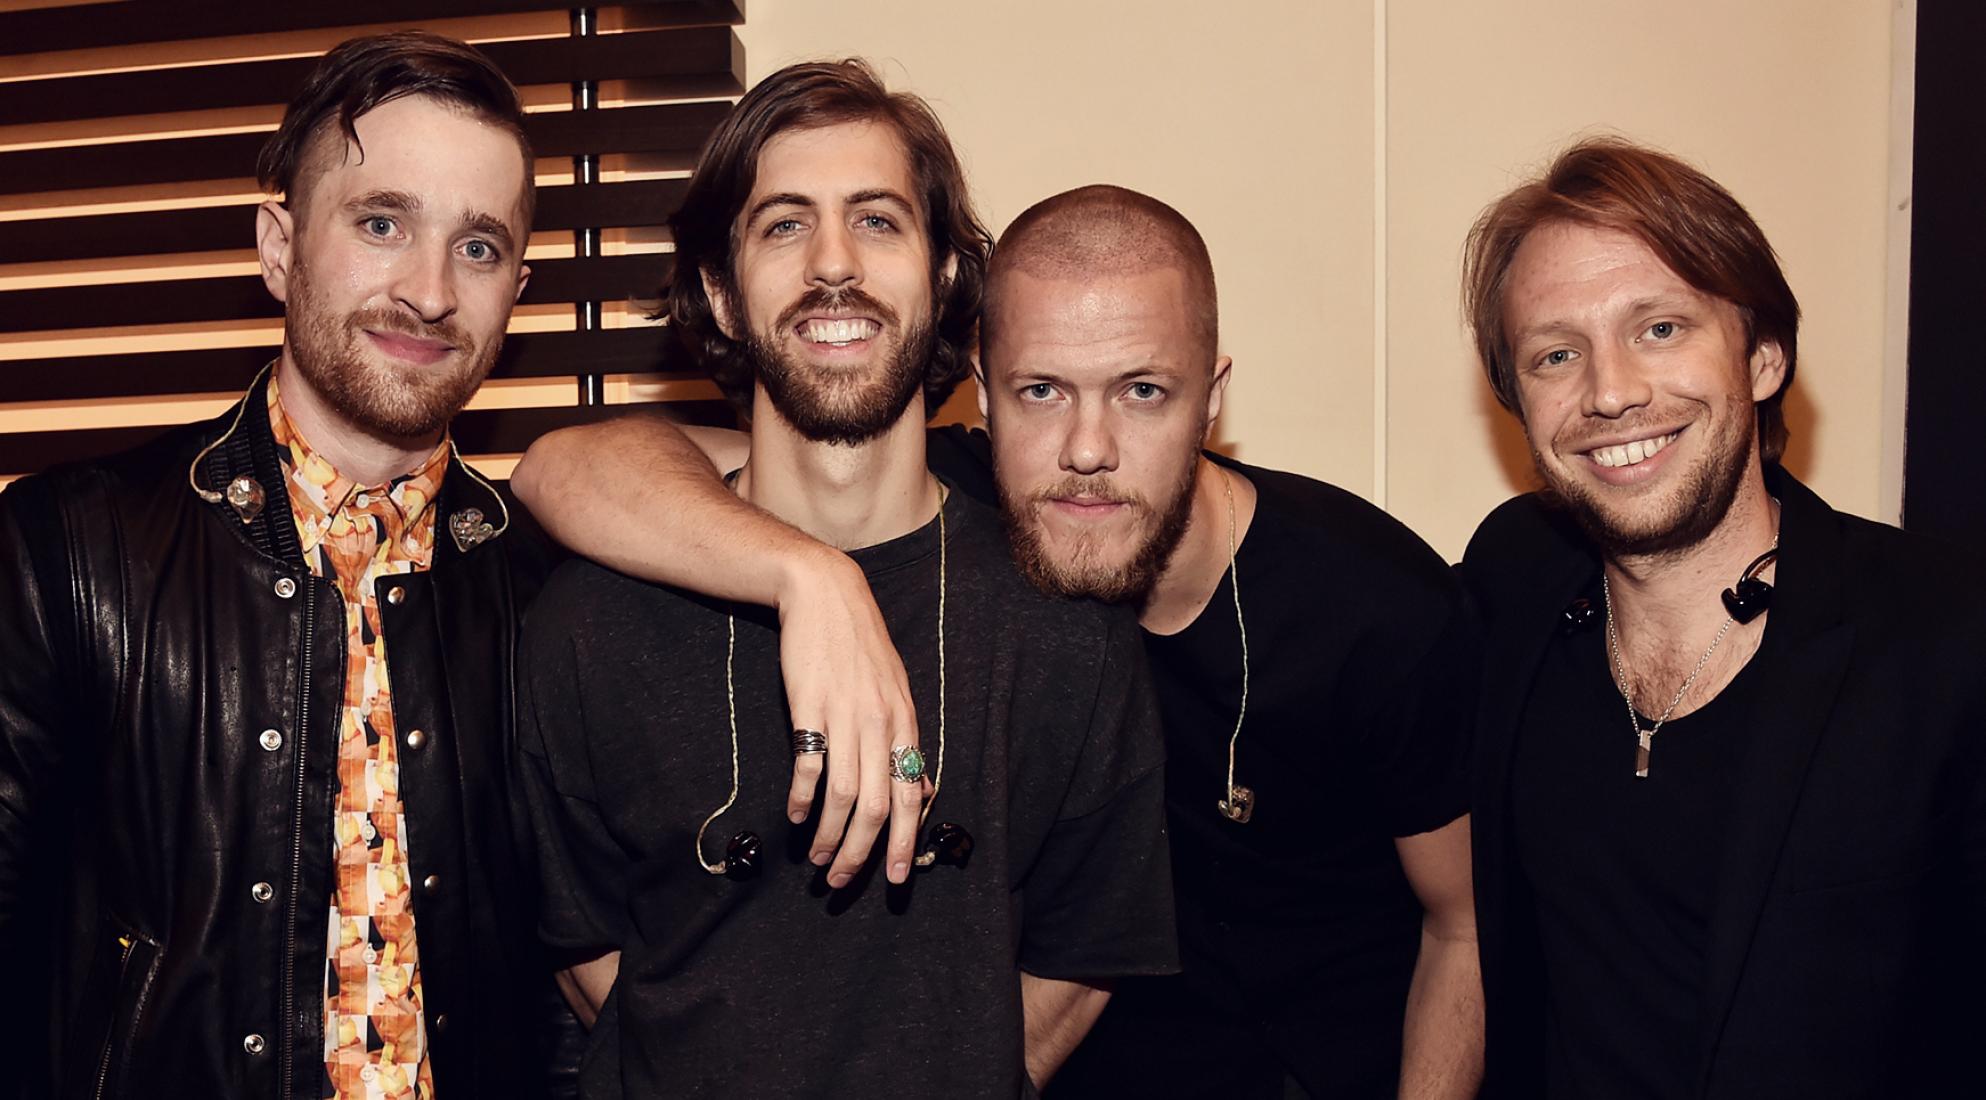 members of imagine dragons graduayed from which music school?